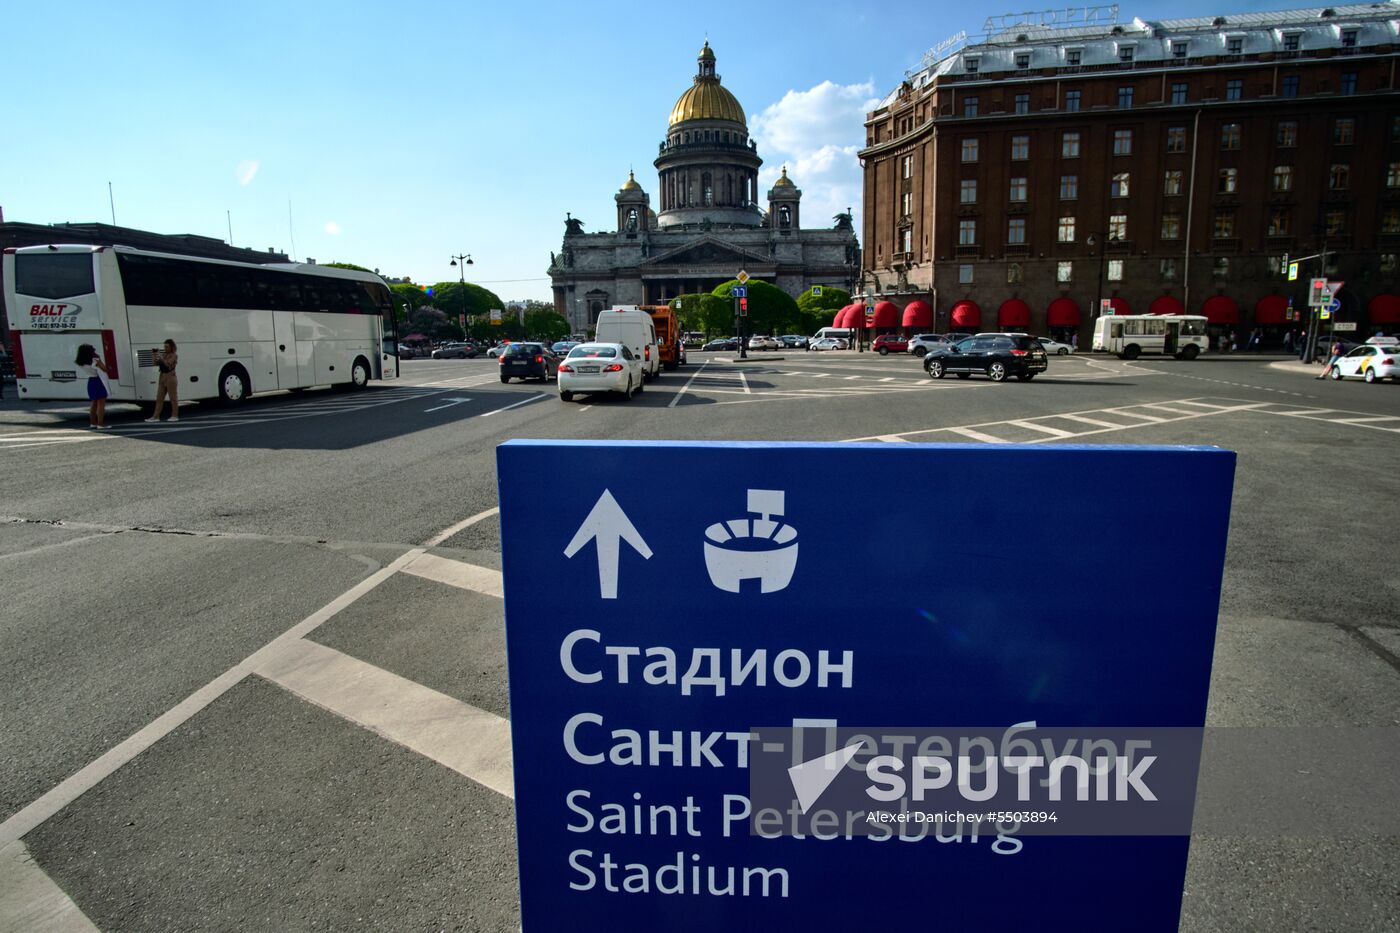 Preparing St. Petersburg for the 2018 FIFA World Cup